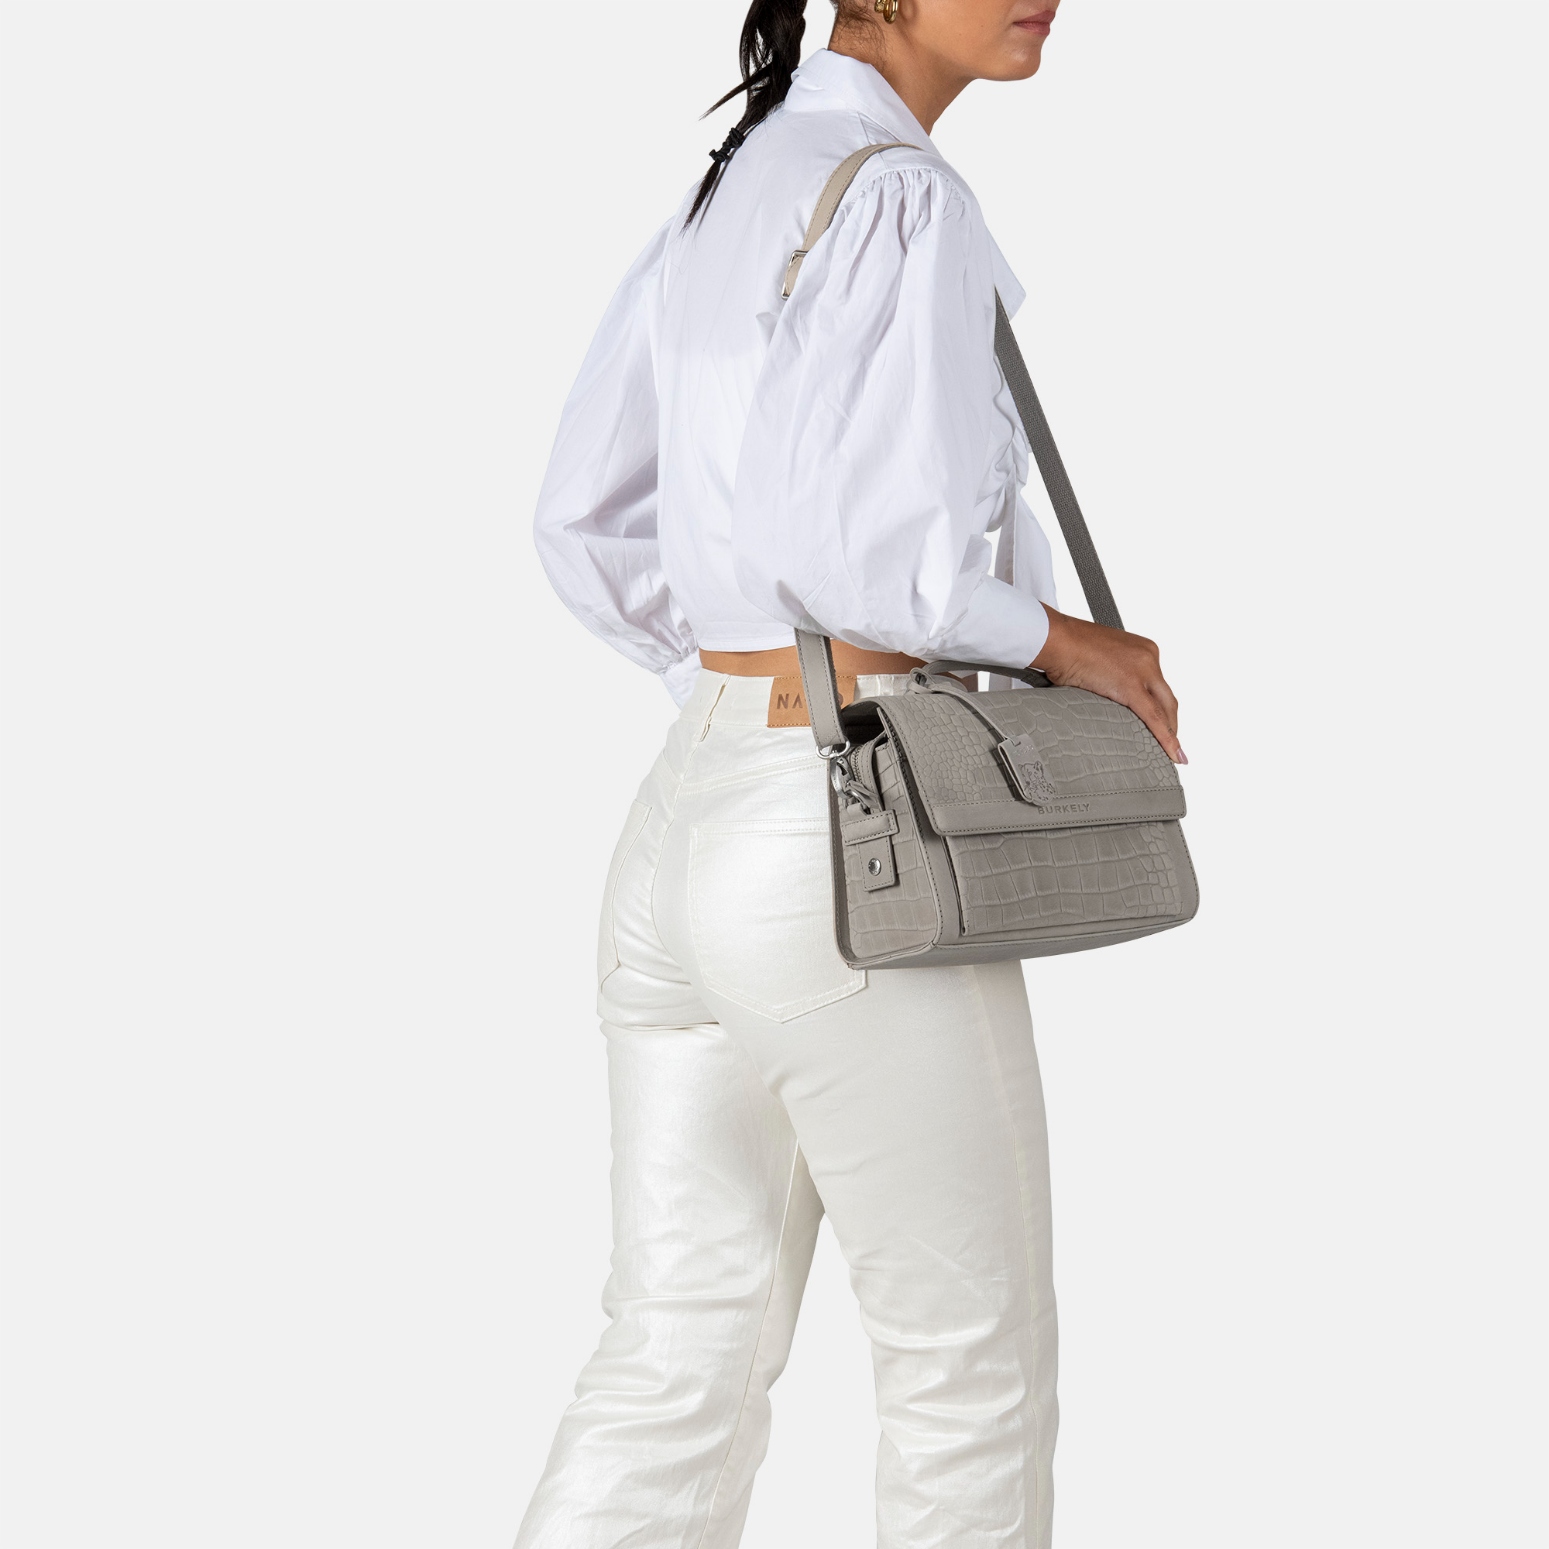 BURKELY CASUAL CAYLA CITYBAG